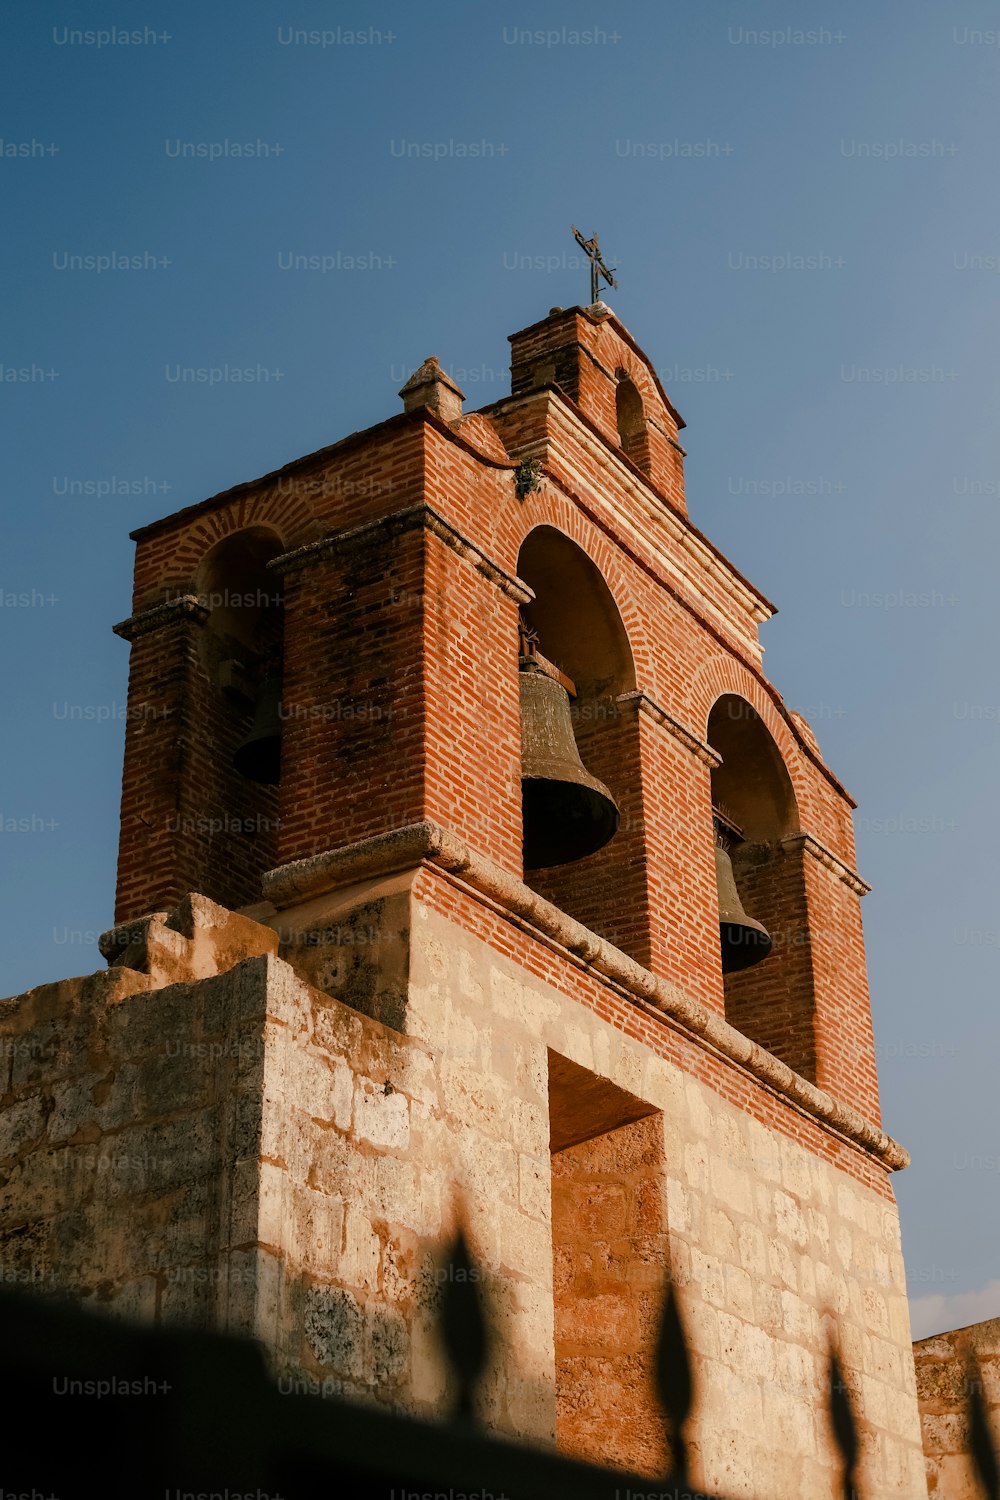 a tall brick tower with a cross on top